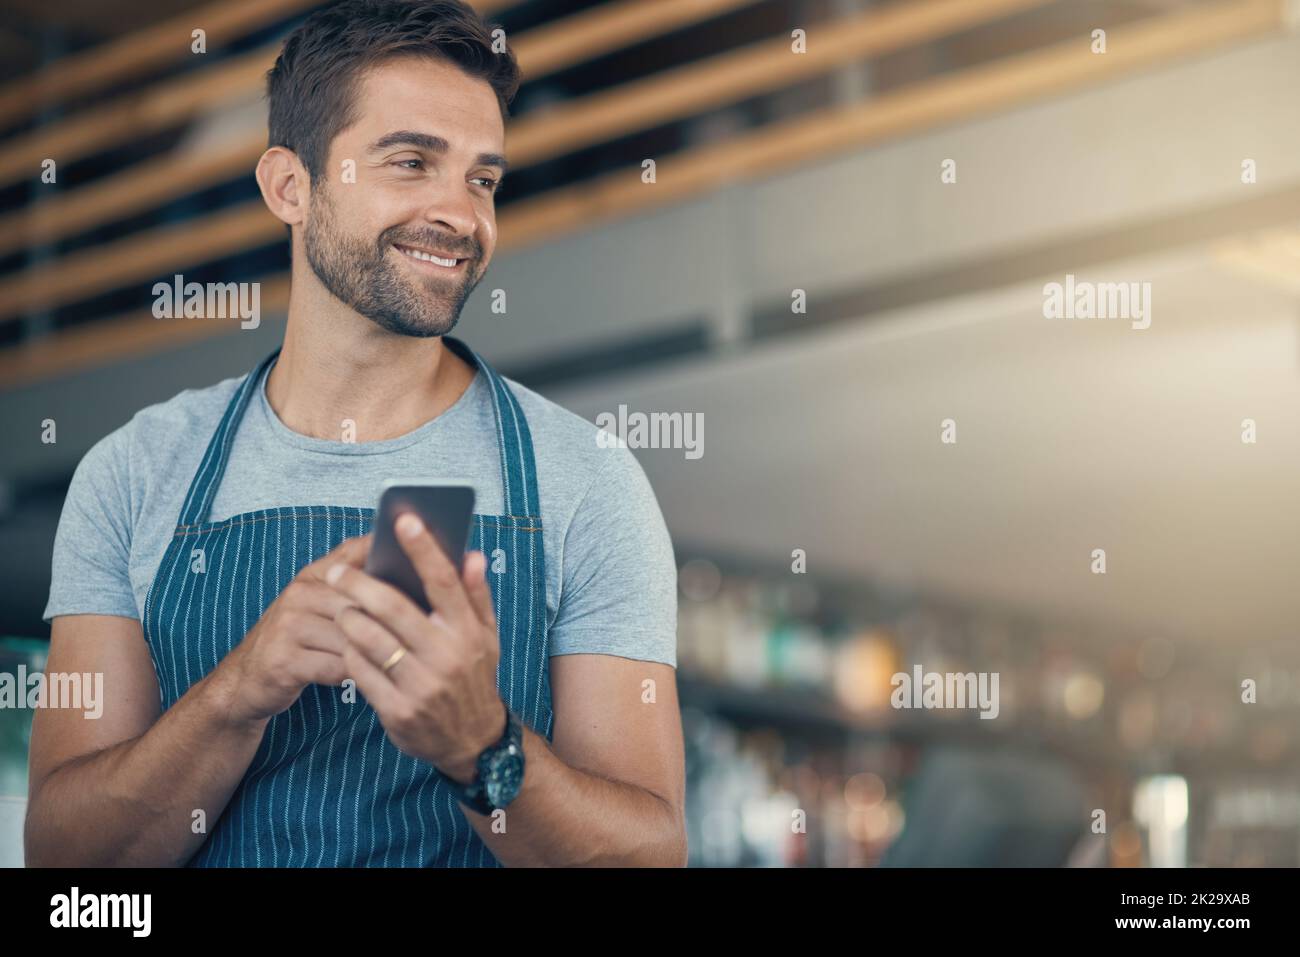 Smart baristas use the smartest tech. Shot of a young man using a mobile phone while working at a coffee shop. Stock Photo